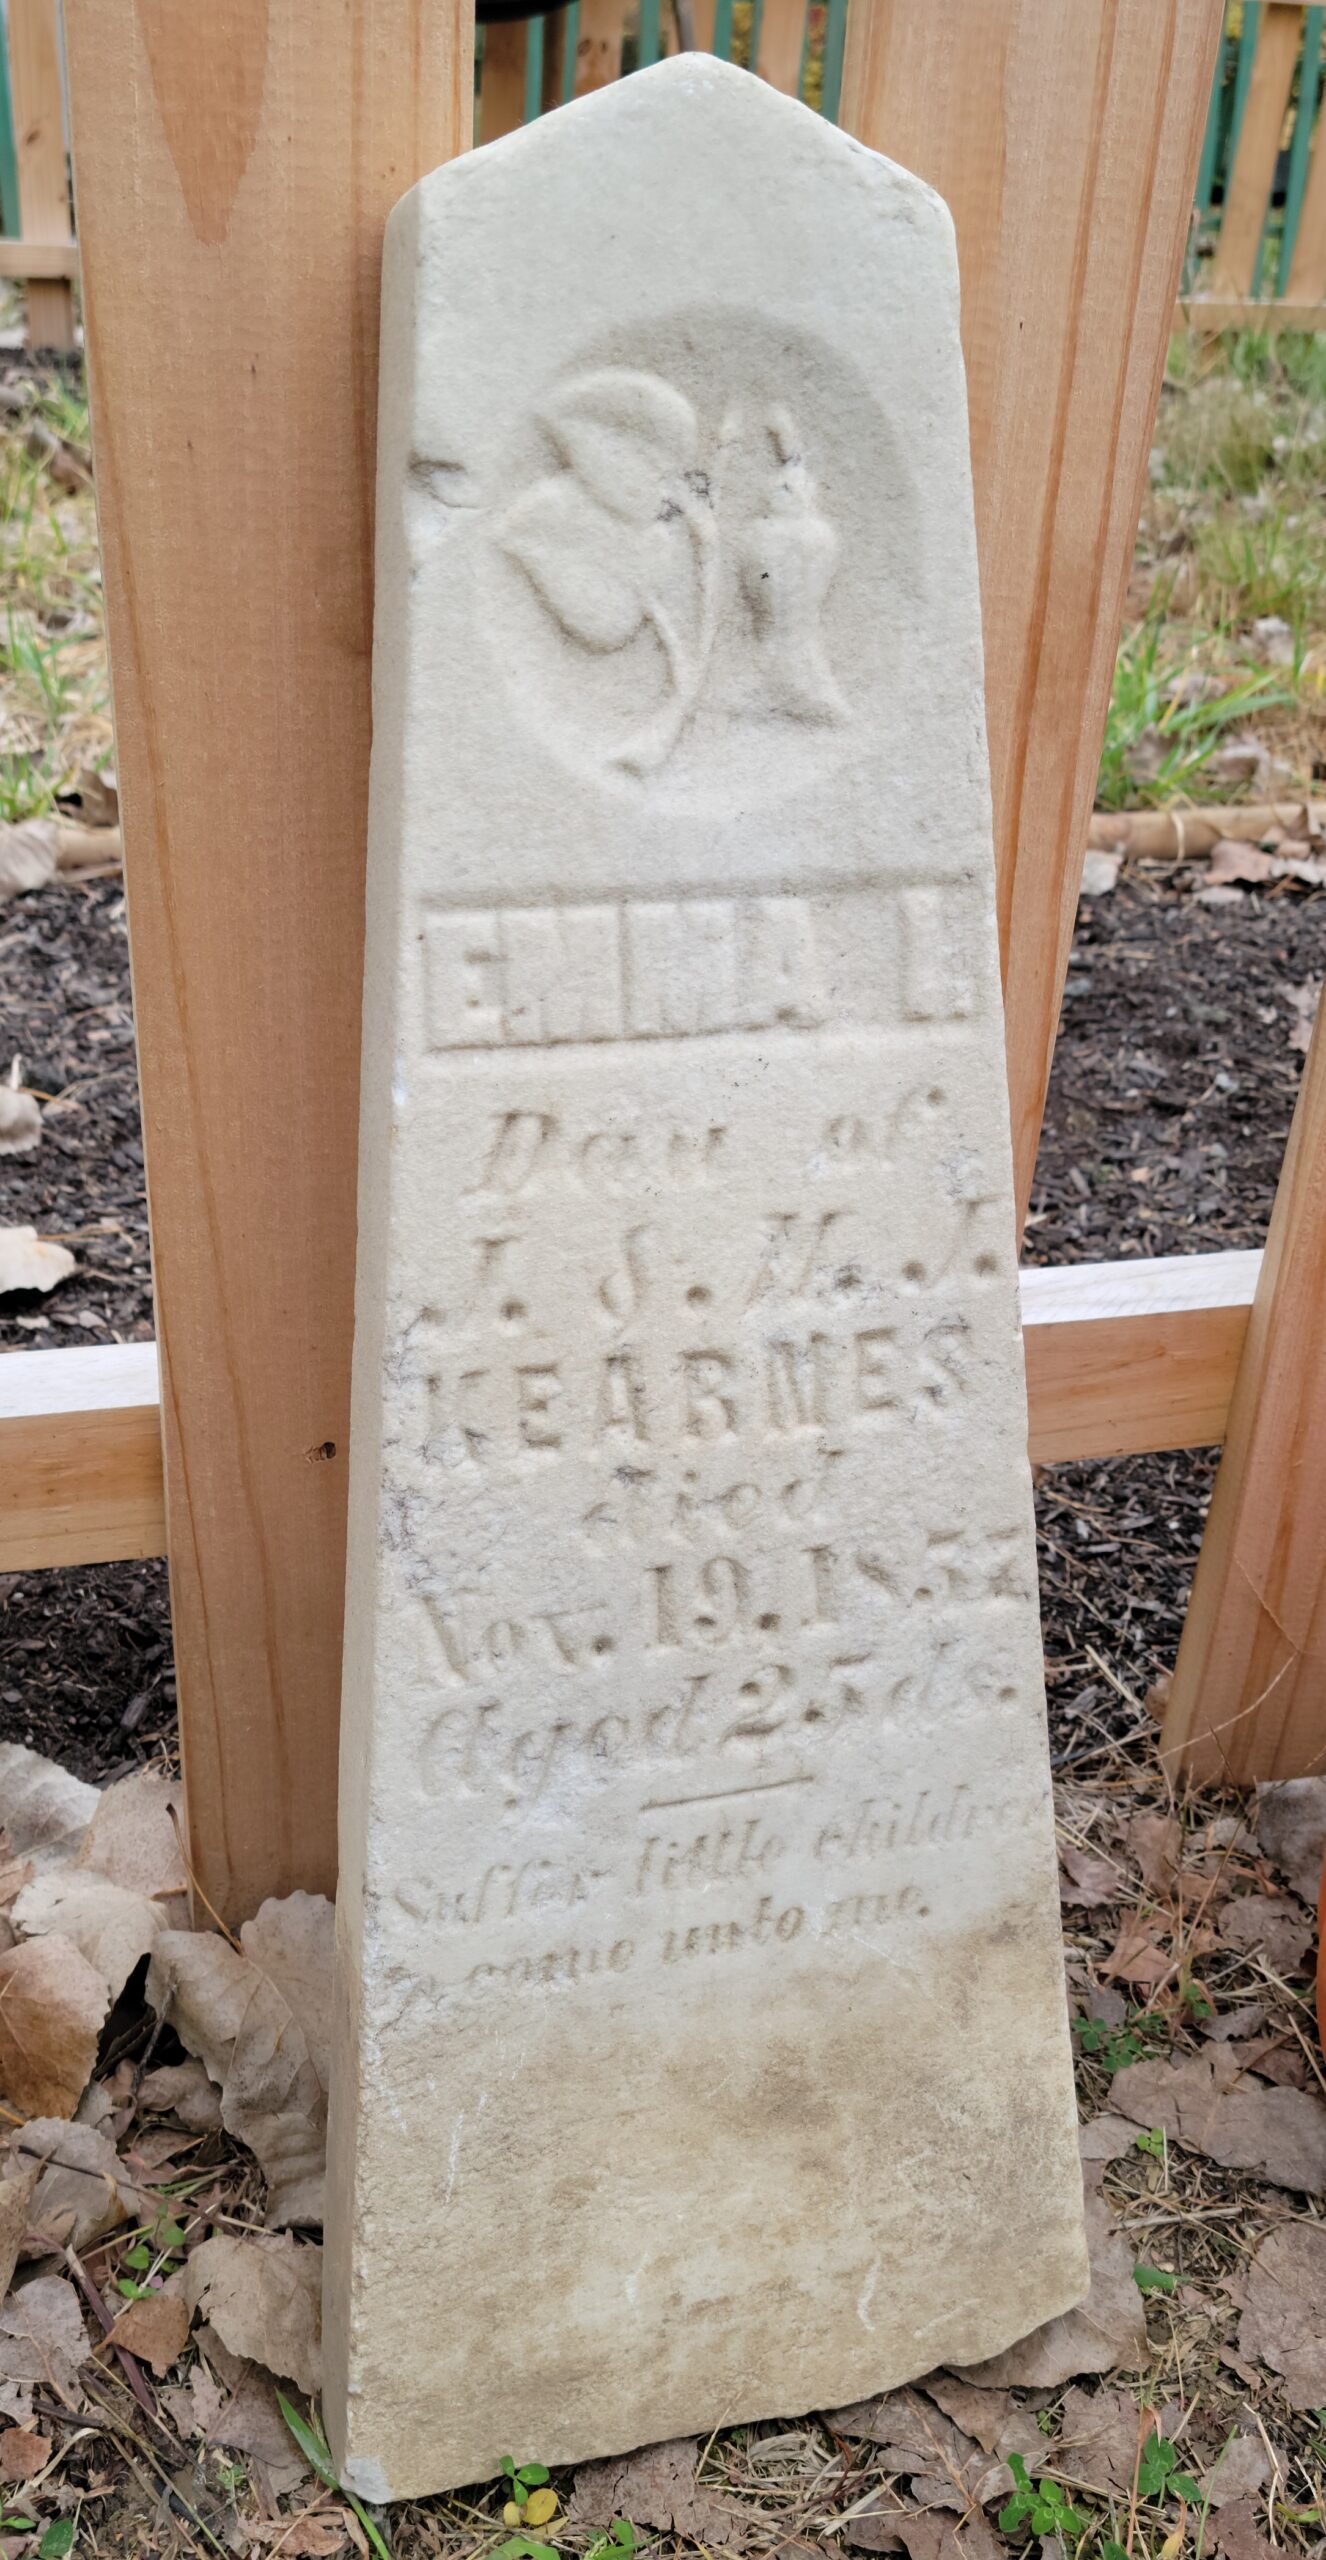 Emma Kearnes (1857) gravestone, currently in possession of the Ohio History Connection